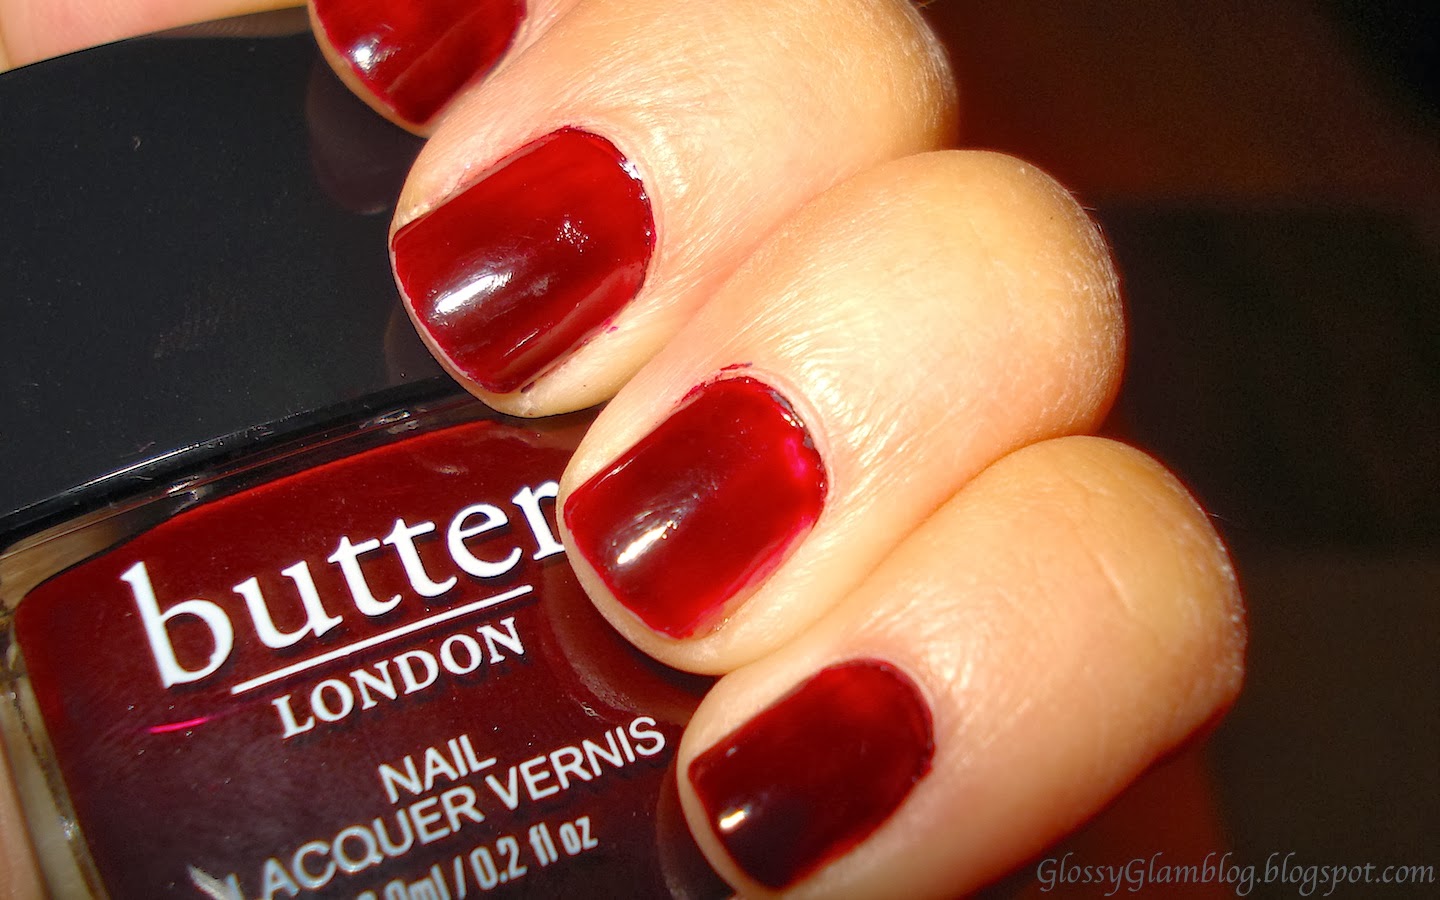 7. Butter London Nail Lacquer in "Mossy Mauve" - wide 1